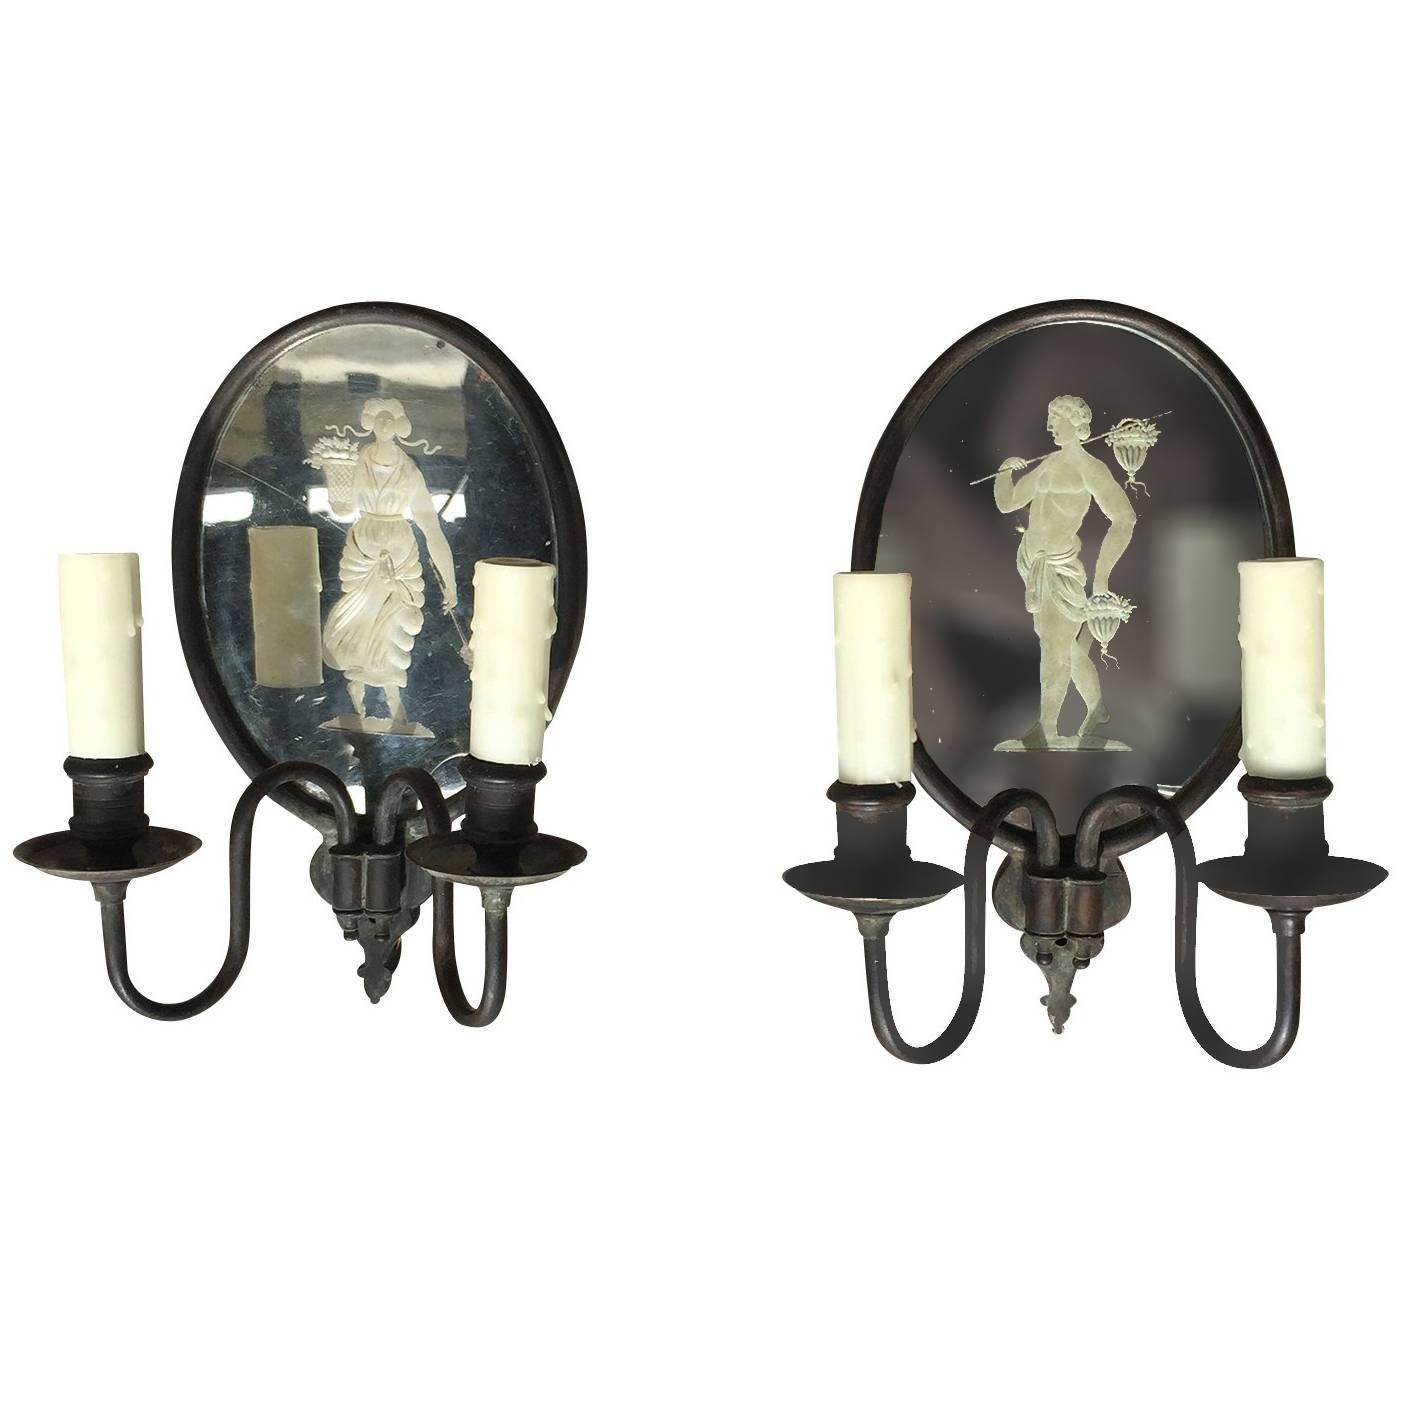 Pair of Charming Early 20th Century Two-Arm Mirrored Oval Sconces with Etchings